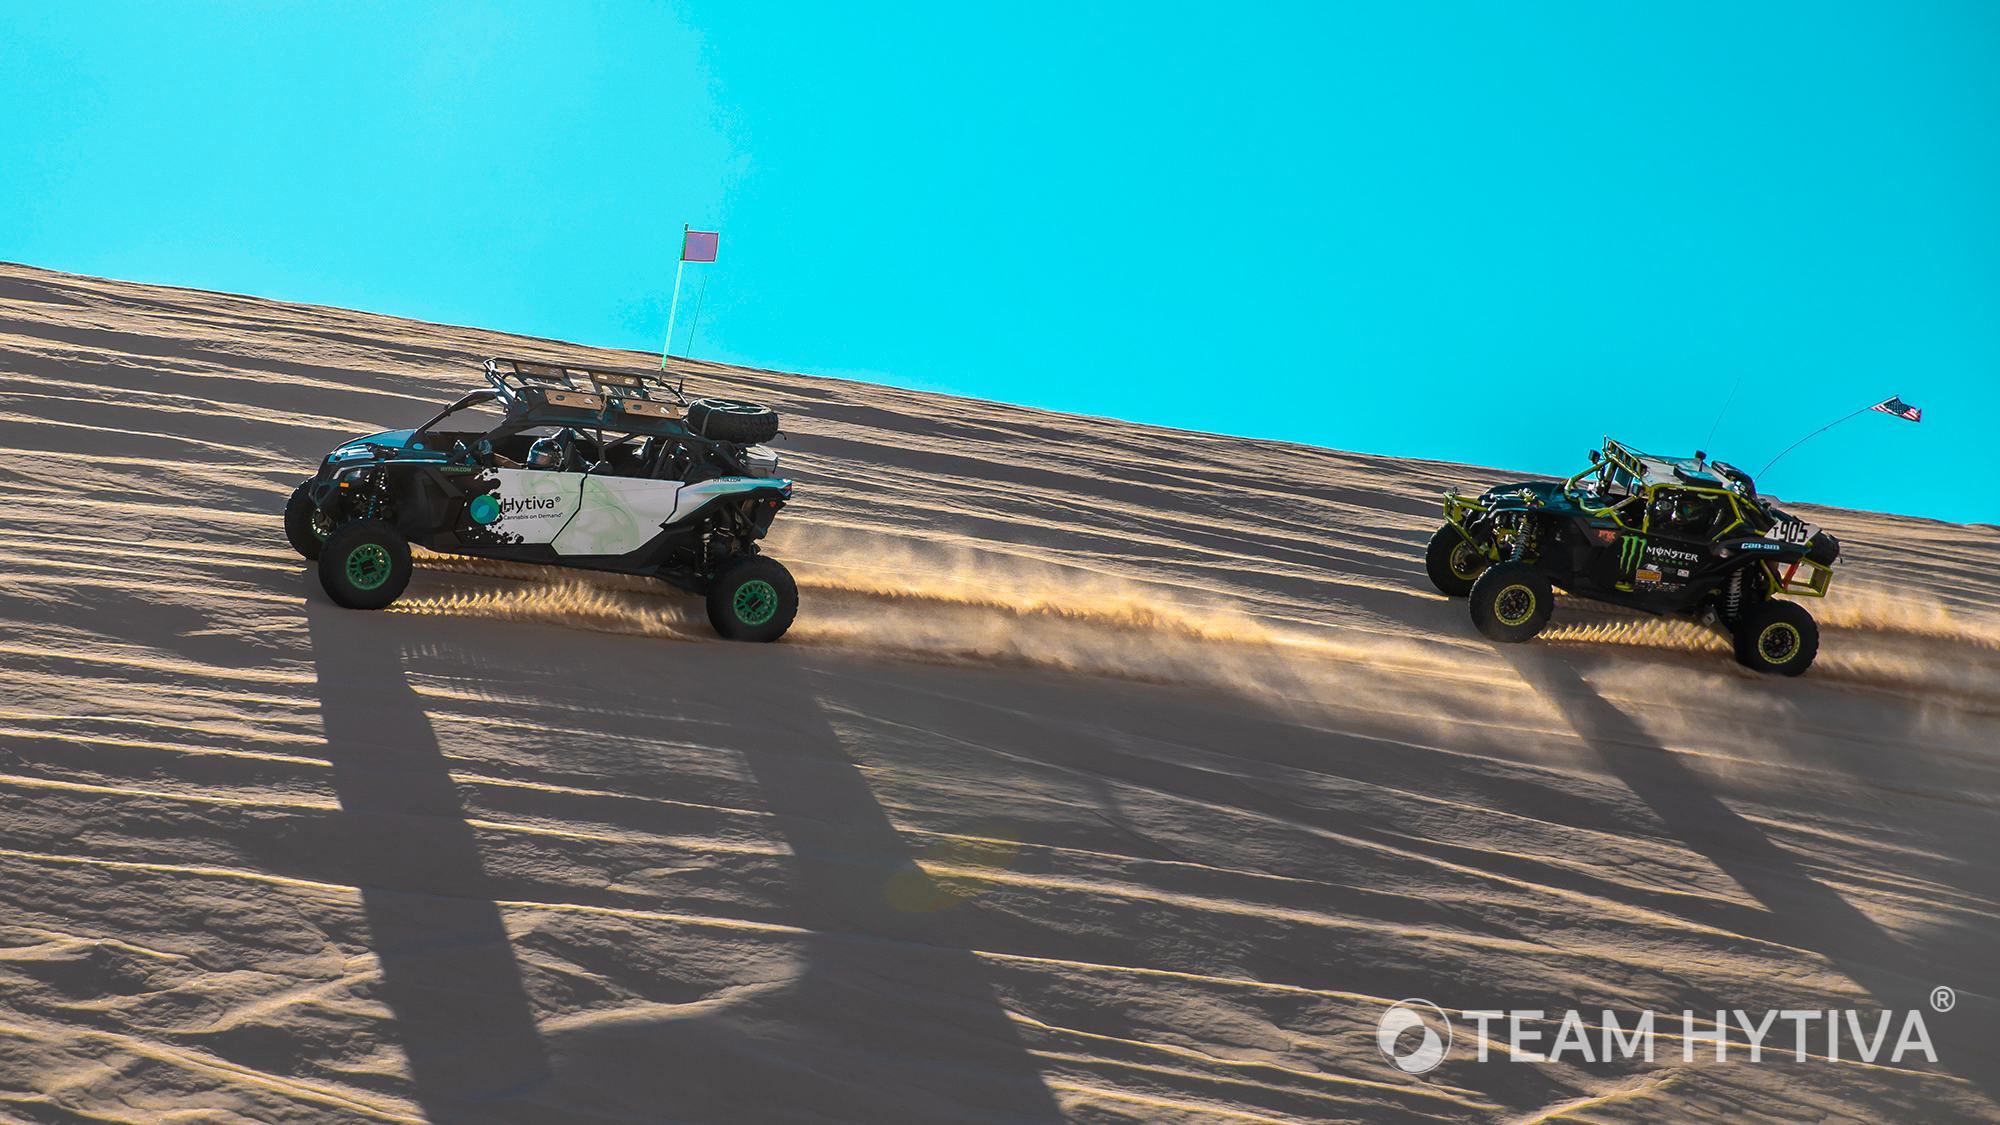 Team Hytiva Canam being chased by Monster Energy Canam